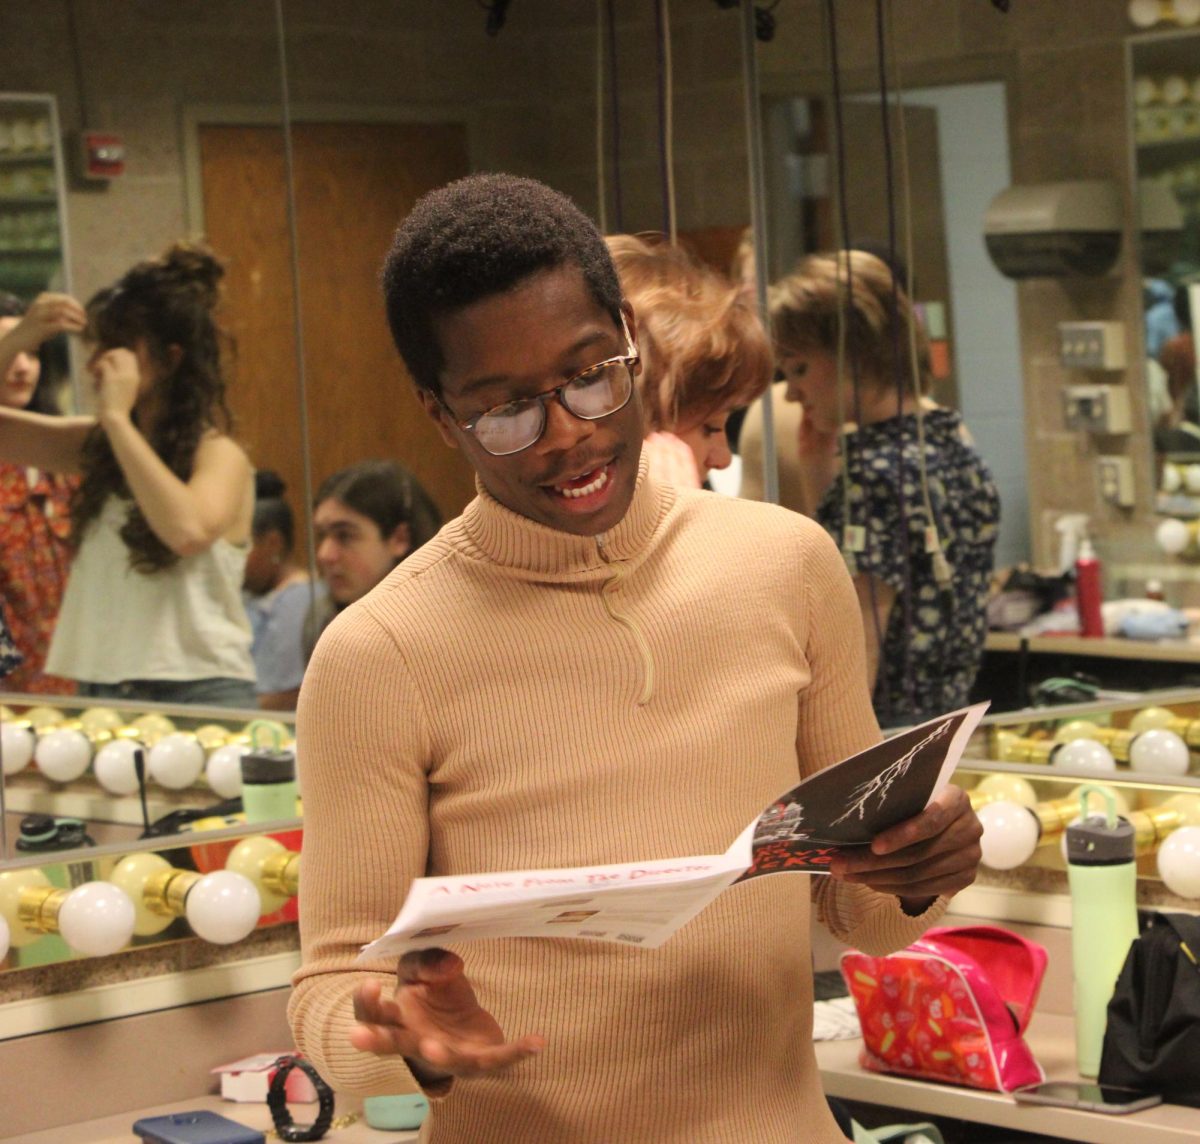 Nate Holder reads a program to his castmates in the dressing rooms before their first showing of “The Plot, Like Gravy, Thickens” April 18.  “I do get a little nervous performing in front of an audience,” Holder said. “But once I get into it … I can picture the room empty and just do my thing.”